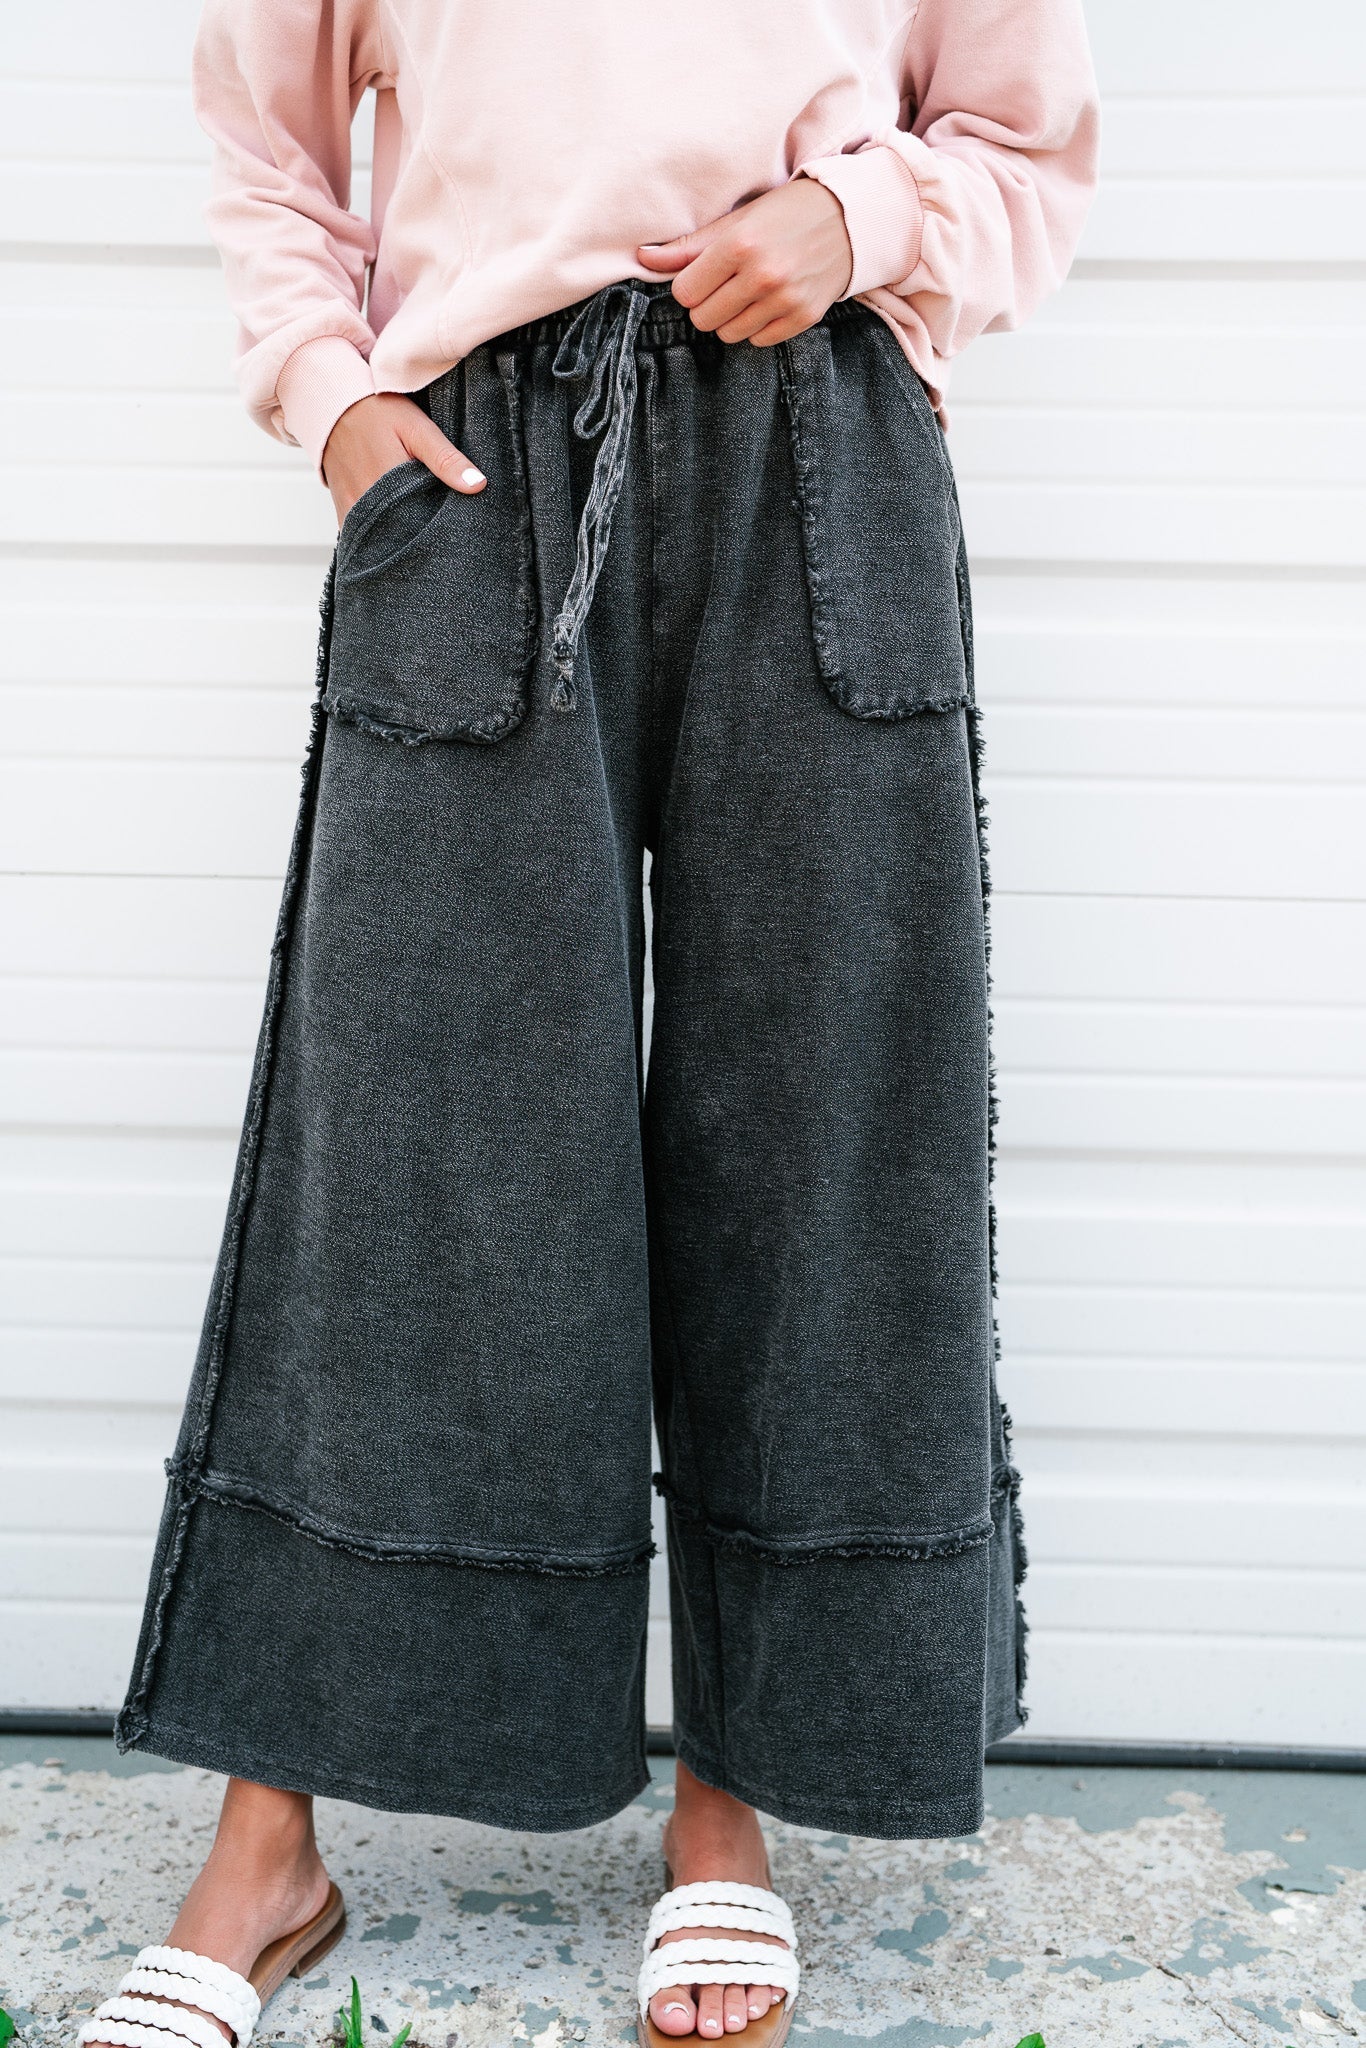 Can't Compete Mineral Wash Wide Leg Pants - Black